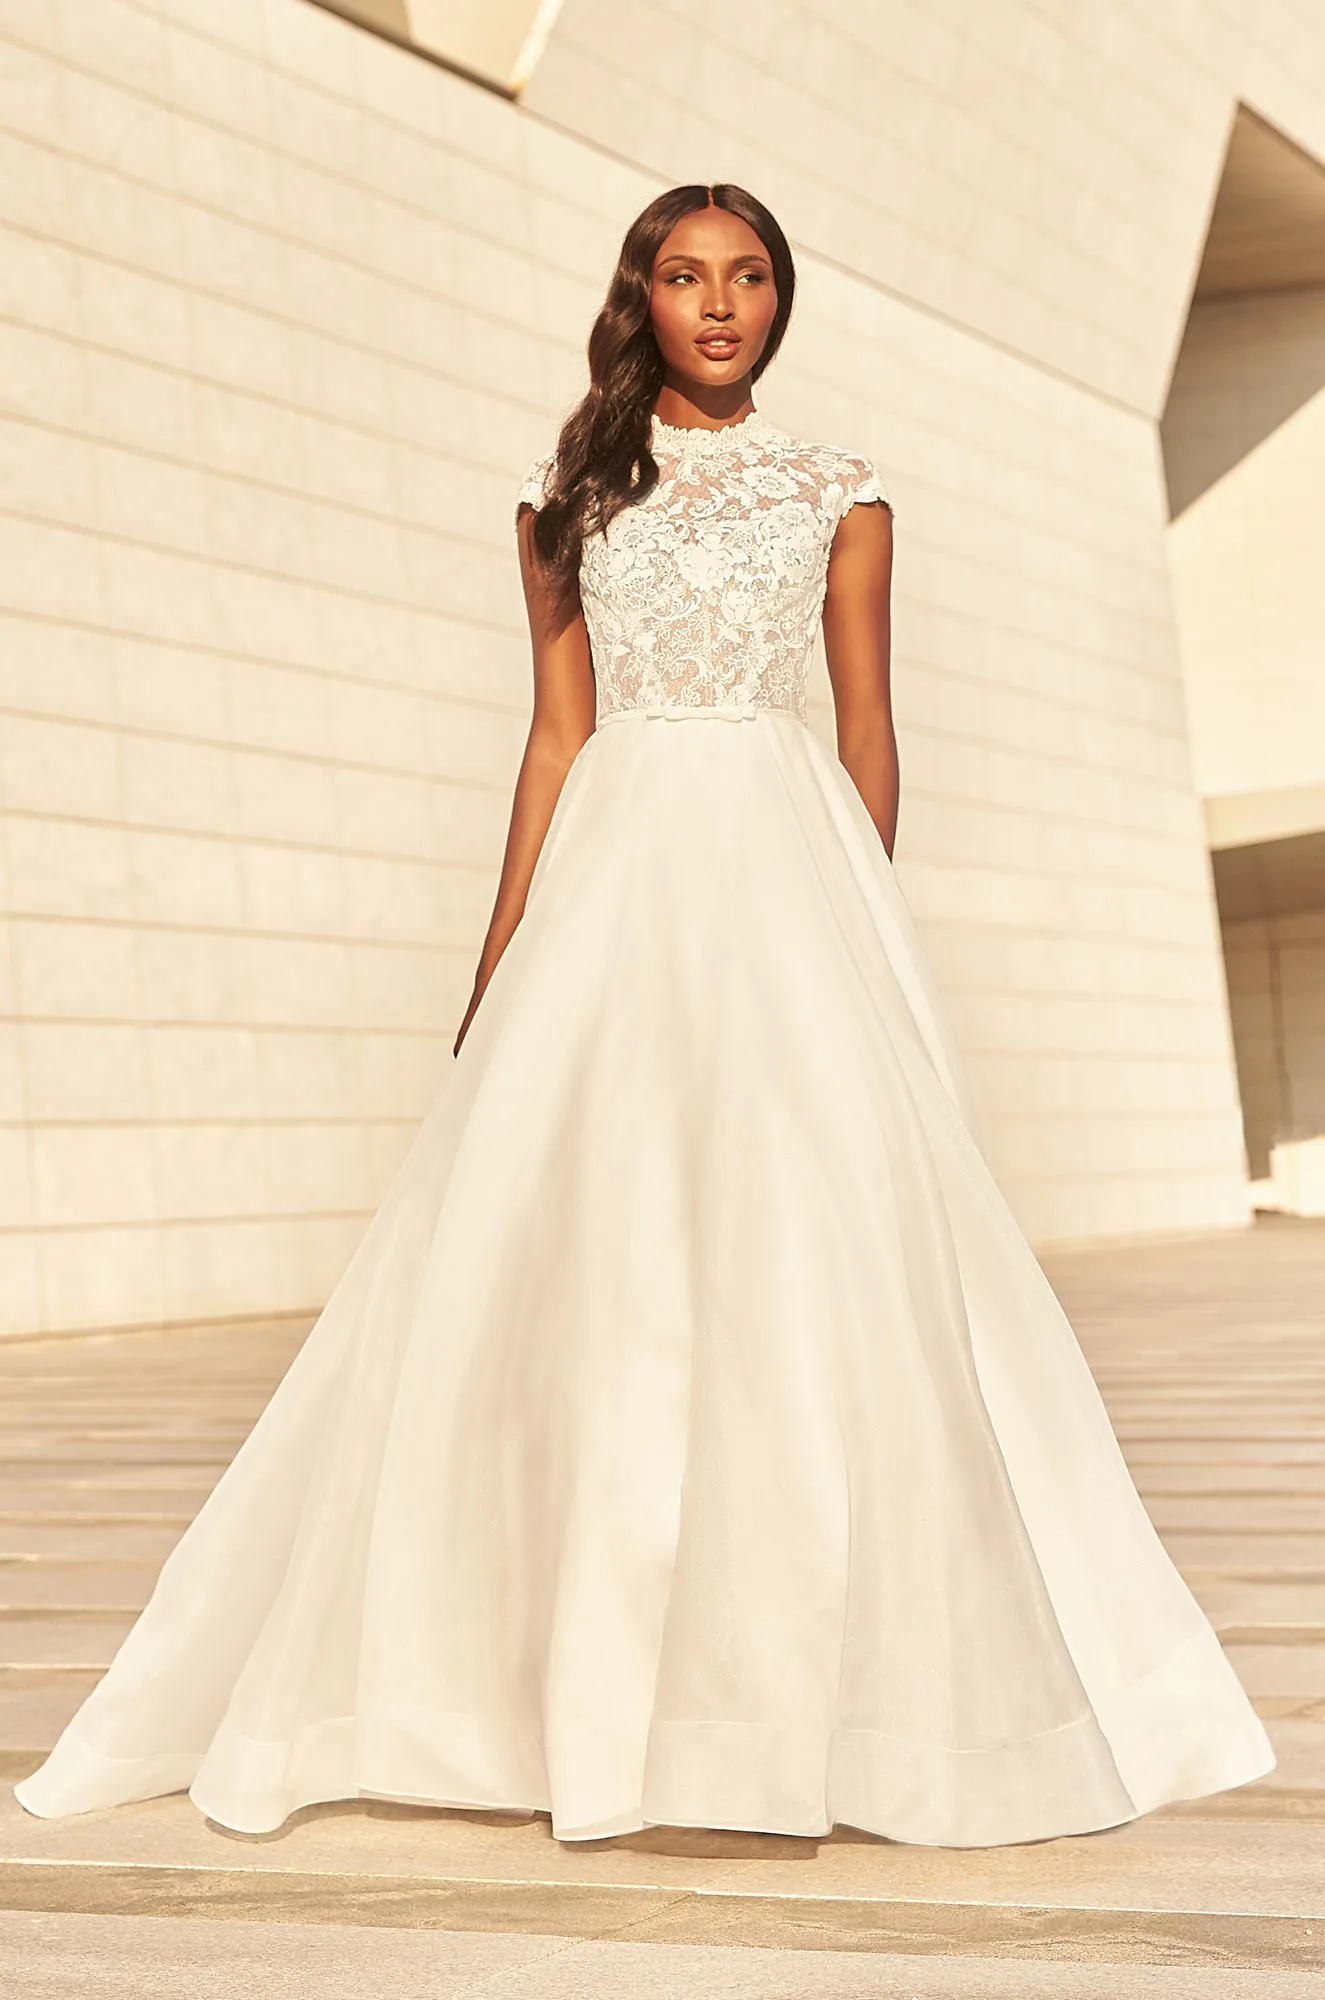 10 High-neck Wedding Dresses For The Modern Bride | Preview.ph